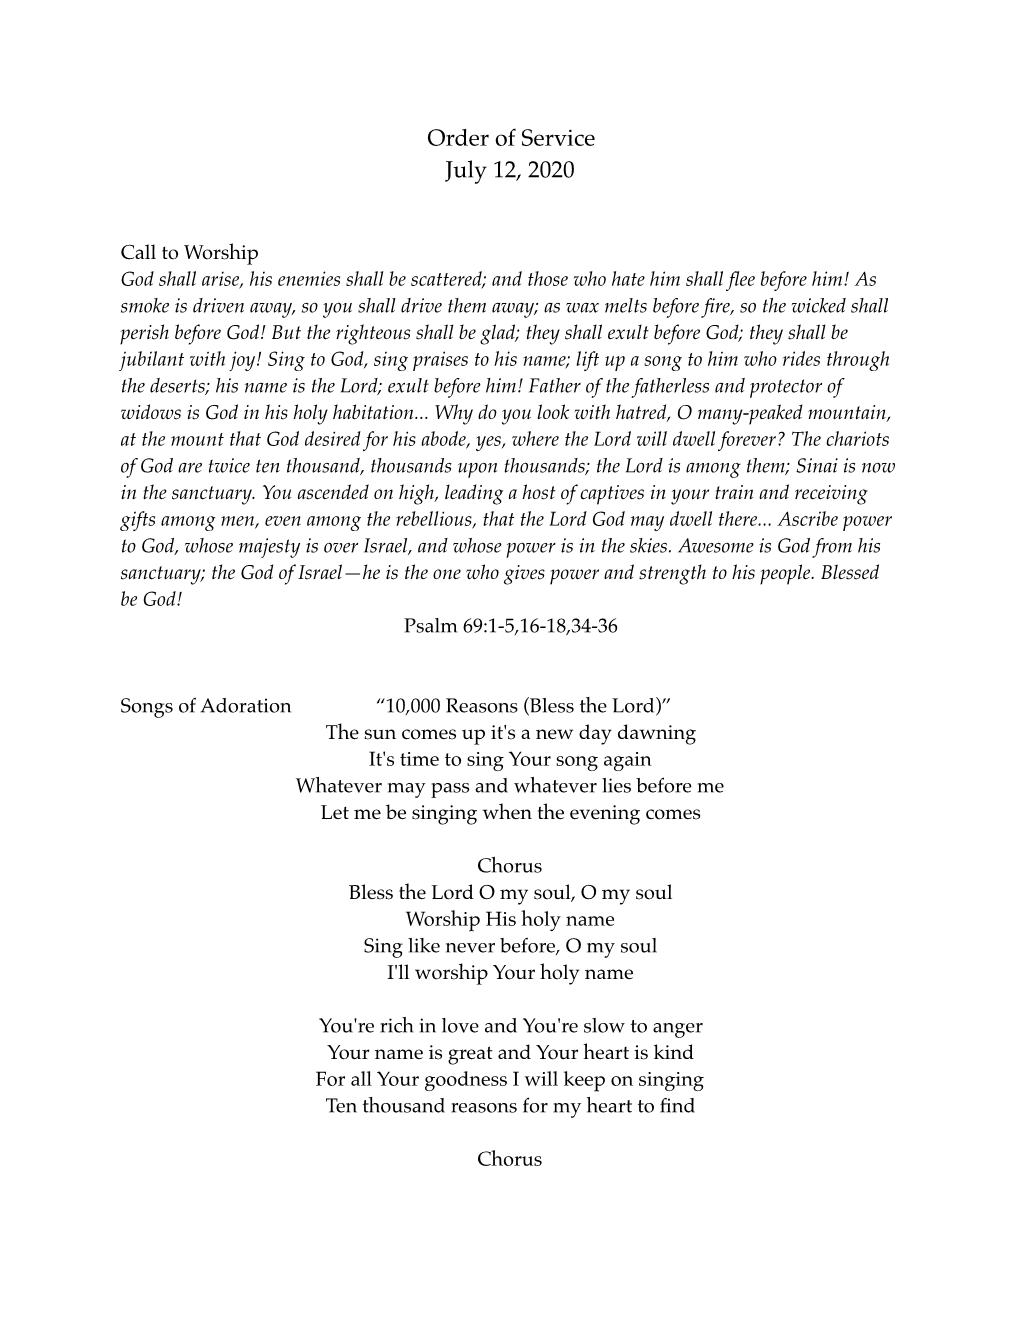 Order of Service 7/12/2020